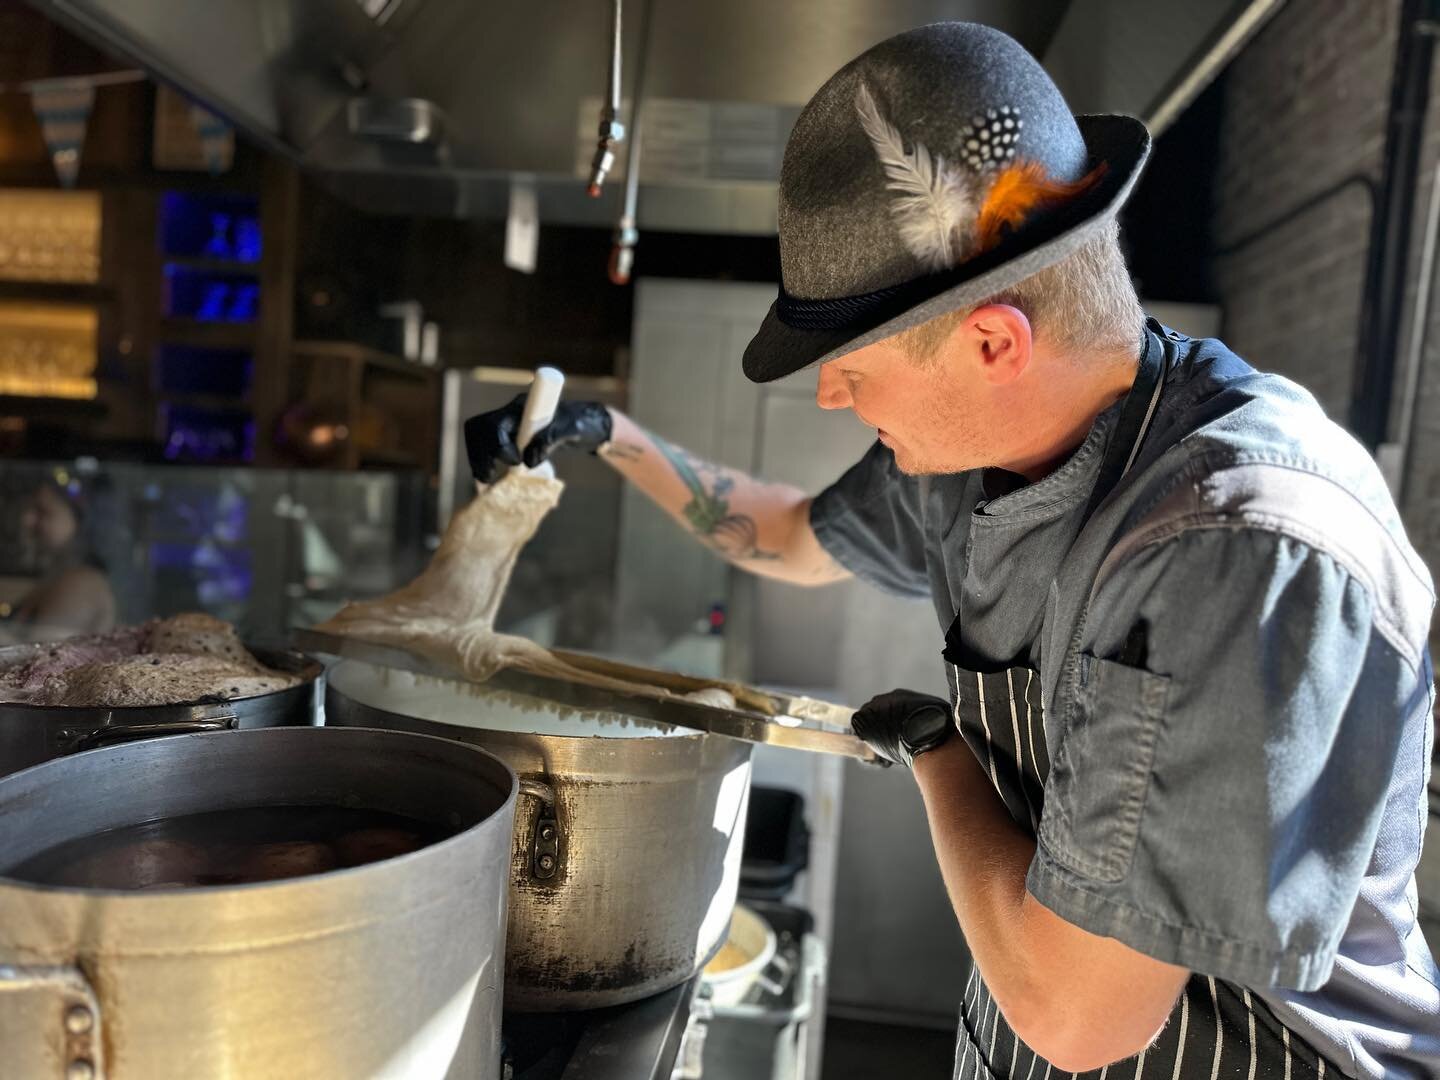 Executive Chef Bradly working his magic with our homemade  Spaetzle 👨&zwj;🍳. #delish #scratchkitchen #germanfood